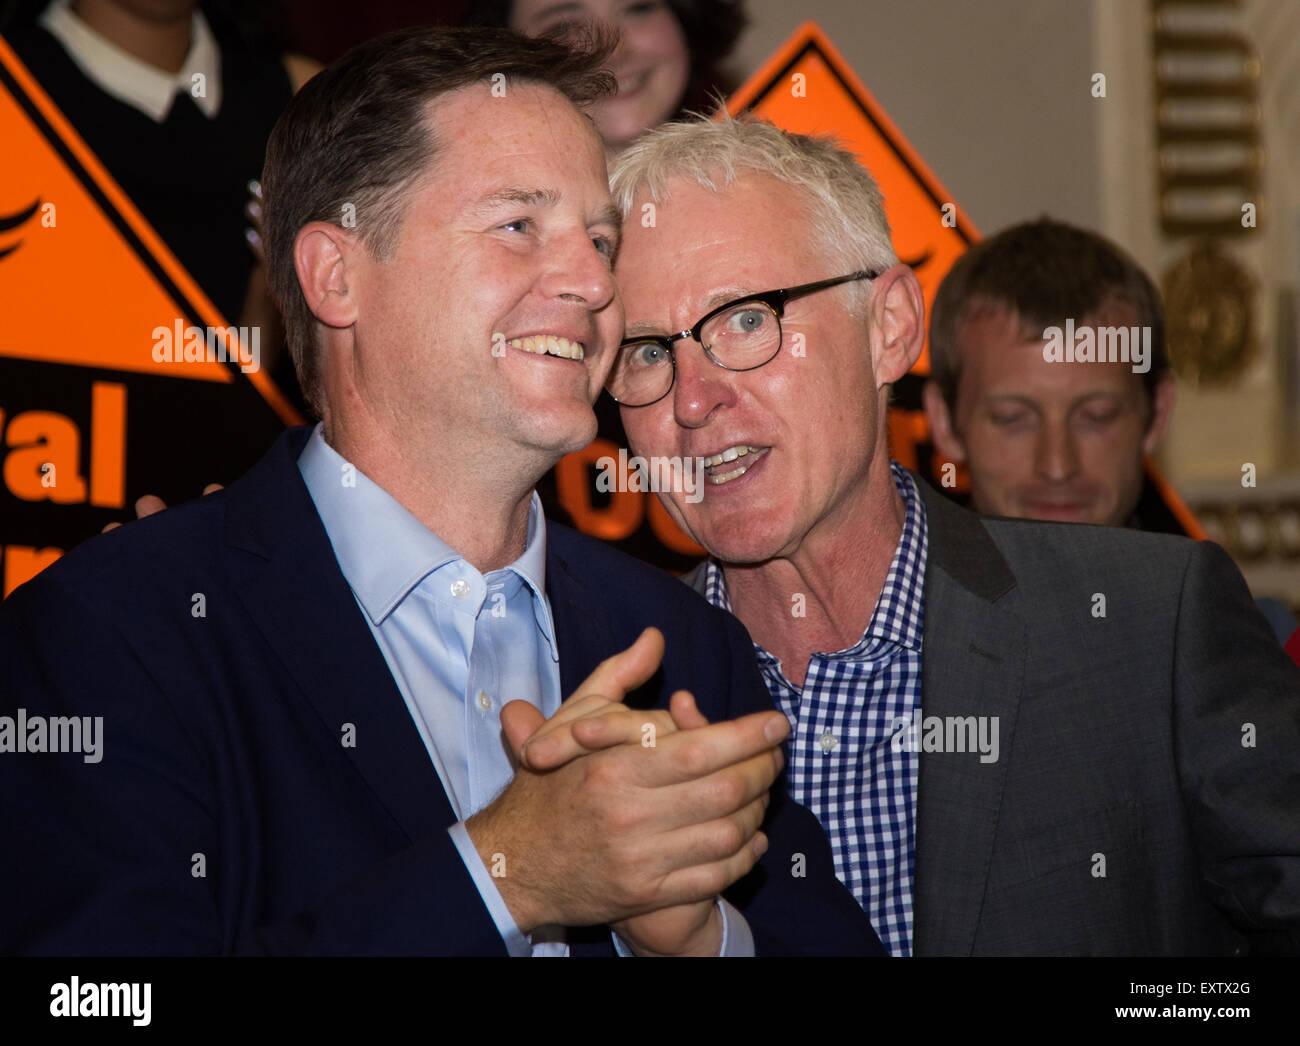 Islington Assembly Hall, London, July 16th 2015. The Liberal Democrats announce their new leader Tim Farron MP who was elected by party members in a vote against Norman Lamb MP. PICTURED: Former LibDem leader and Deputy Prime Minister Nick Clegg and Norman Lamb MP. Credit:  Paul Davey/Alamy Live News Stock Photo